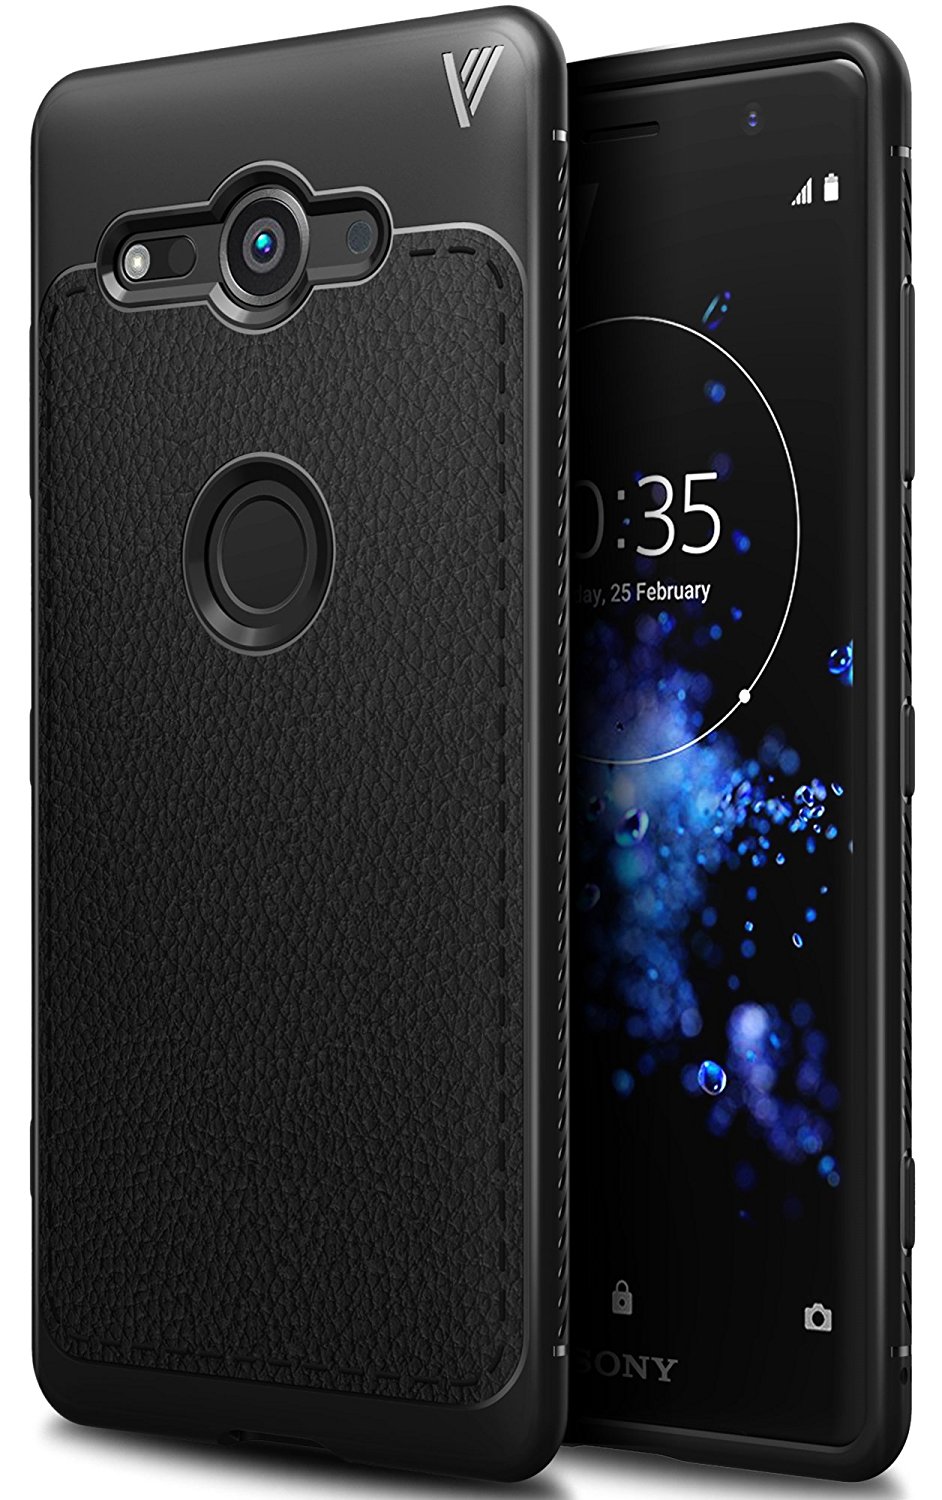 This is our roundup of the best Sony Xperia XZ2 cases you can buy, including this one from KuGi.